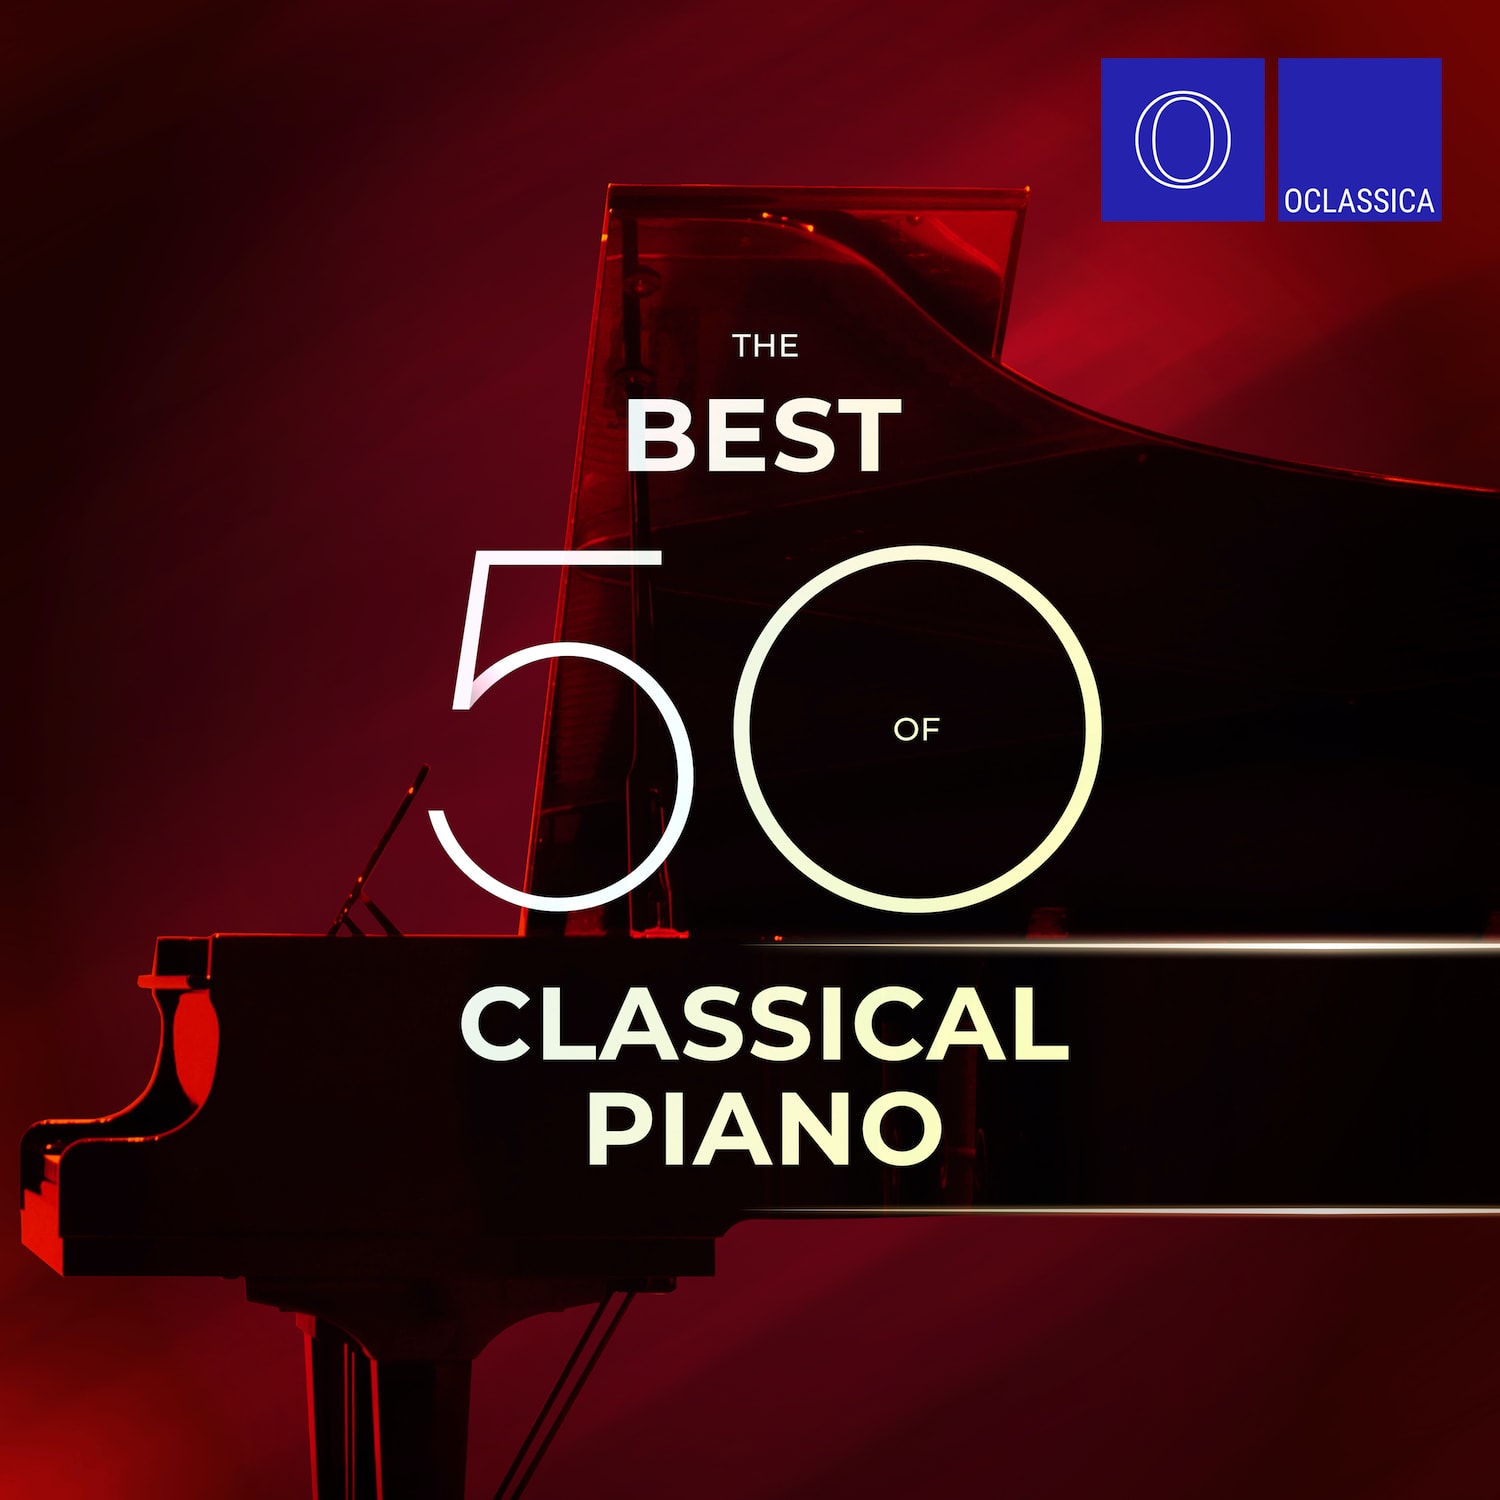 The Top Classical Piano Pieces – The Best 50 of Classical Piano Compilation Album Oclassica